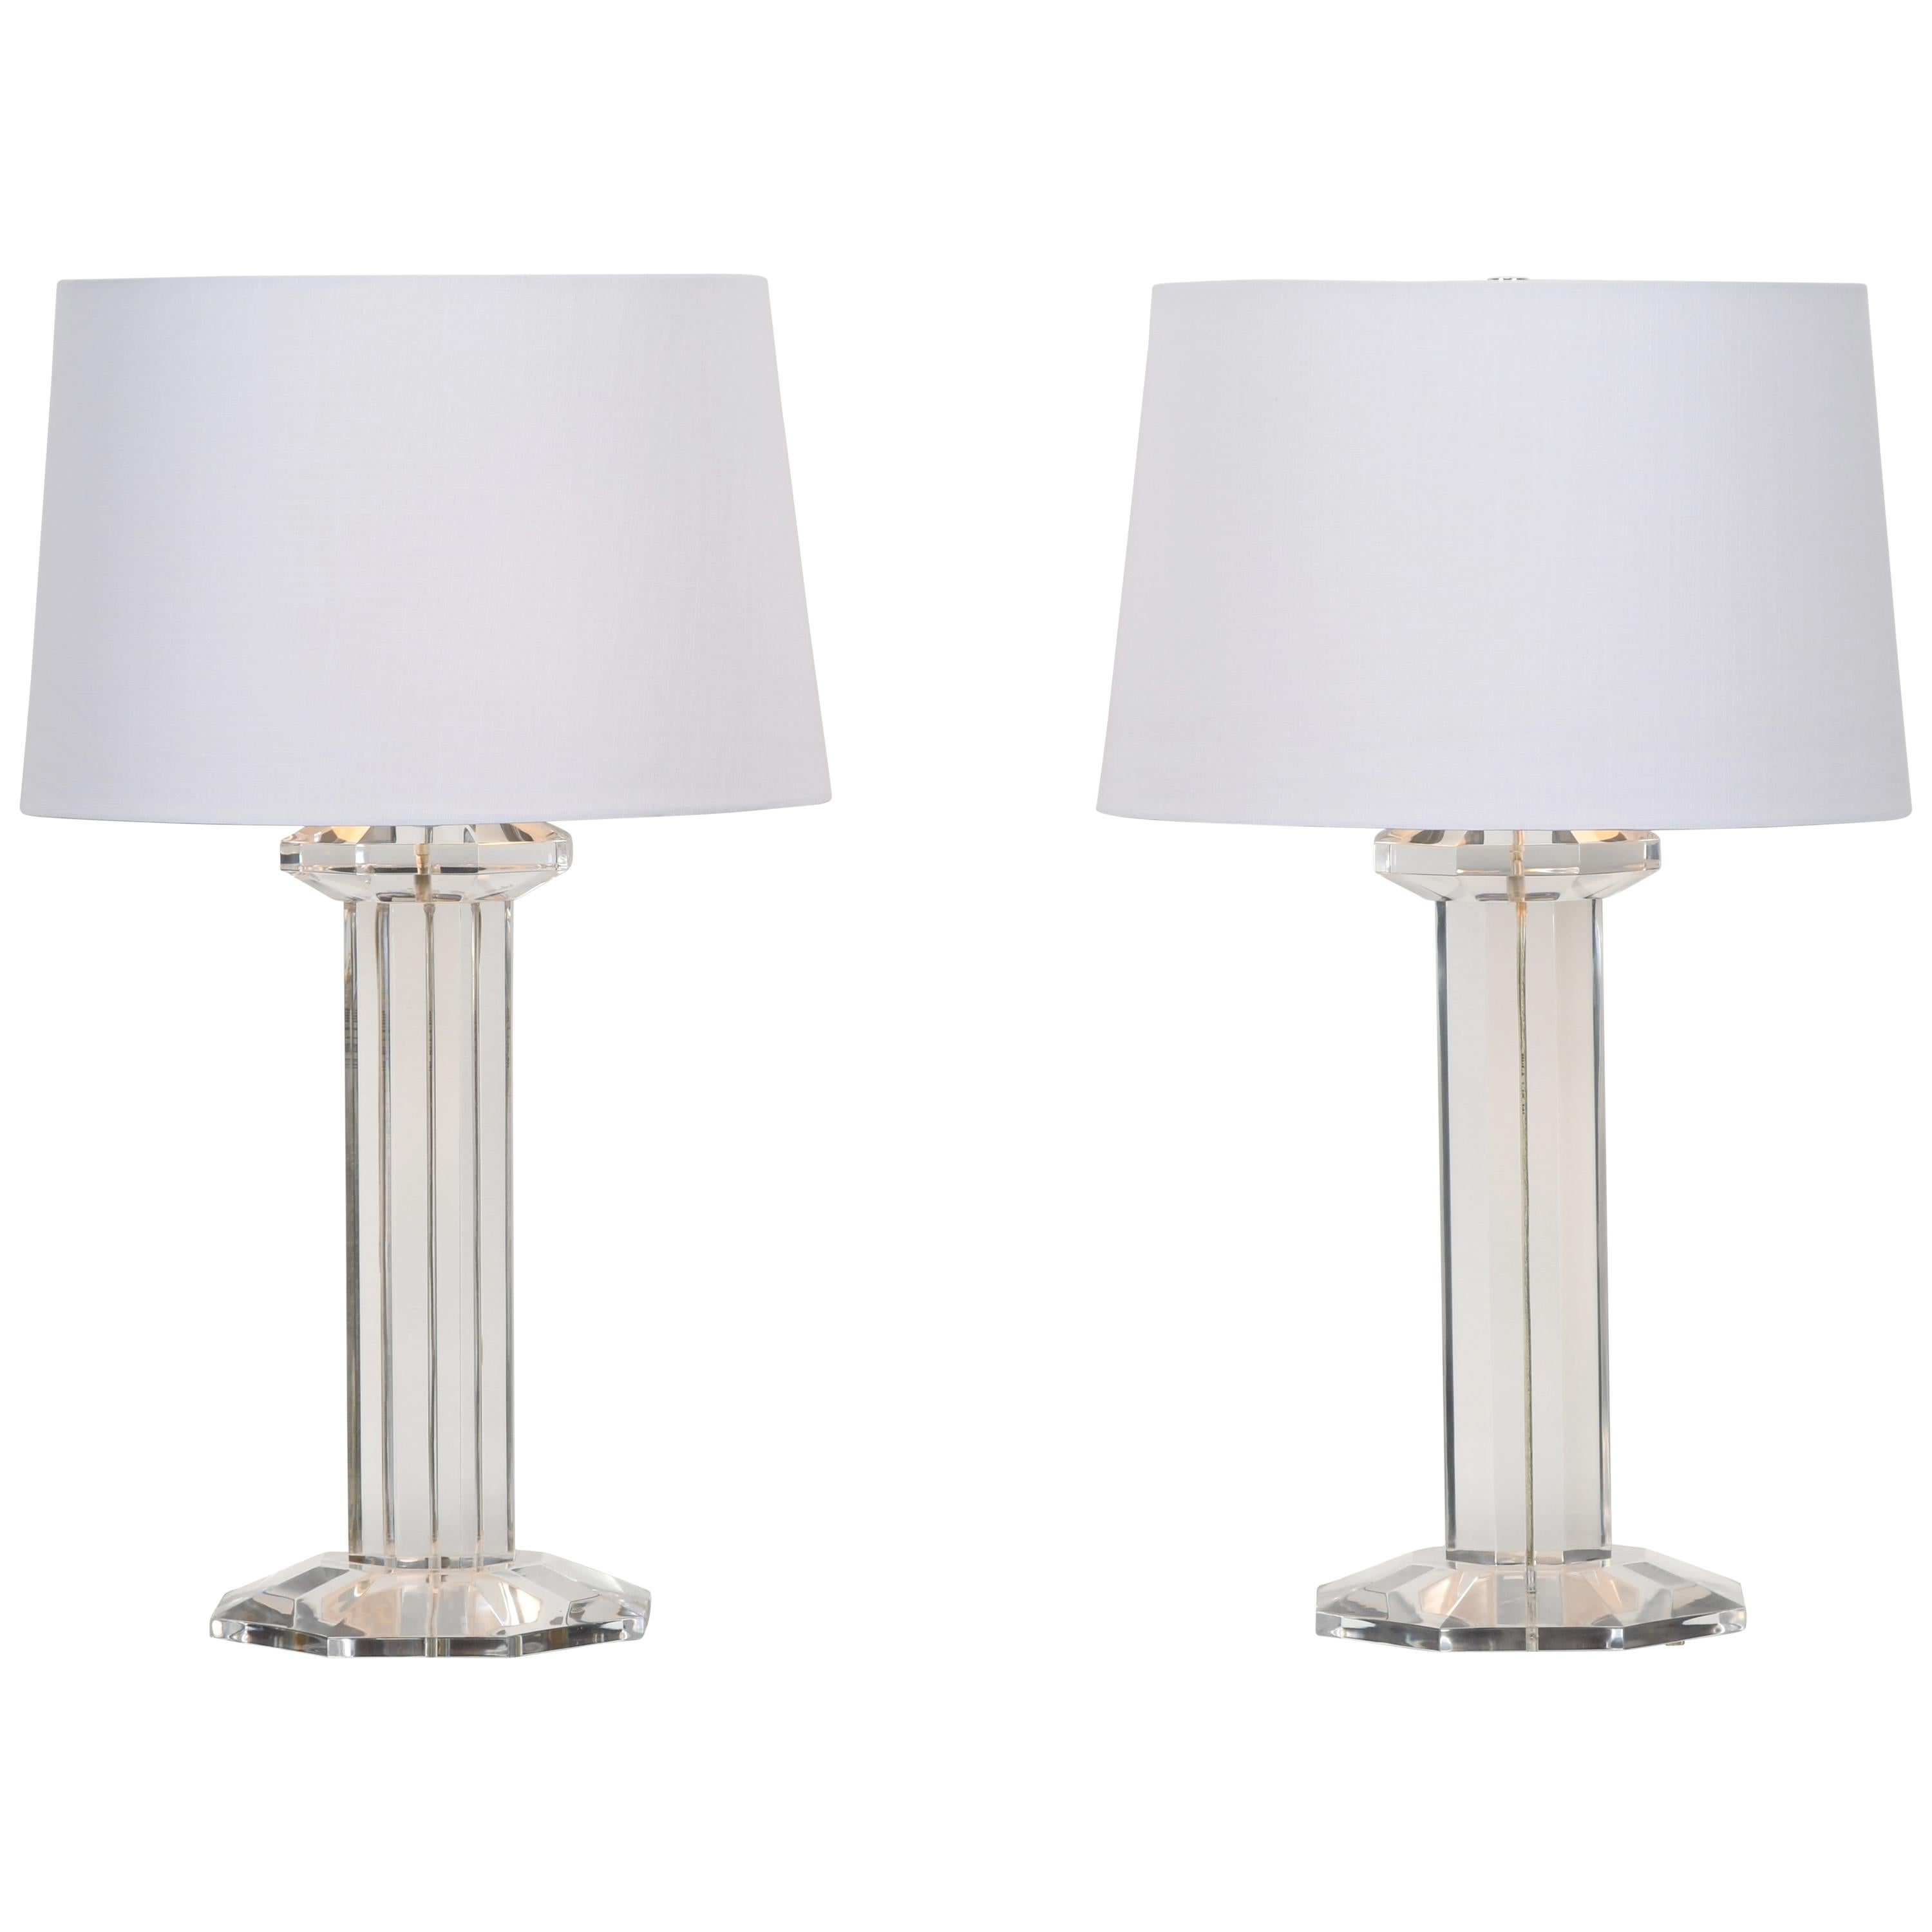 Pair of Signed Lucite Table Lamps by Karl Springer, 1980s